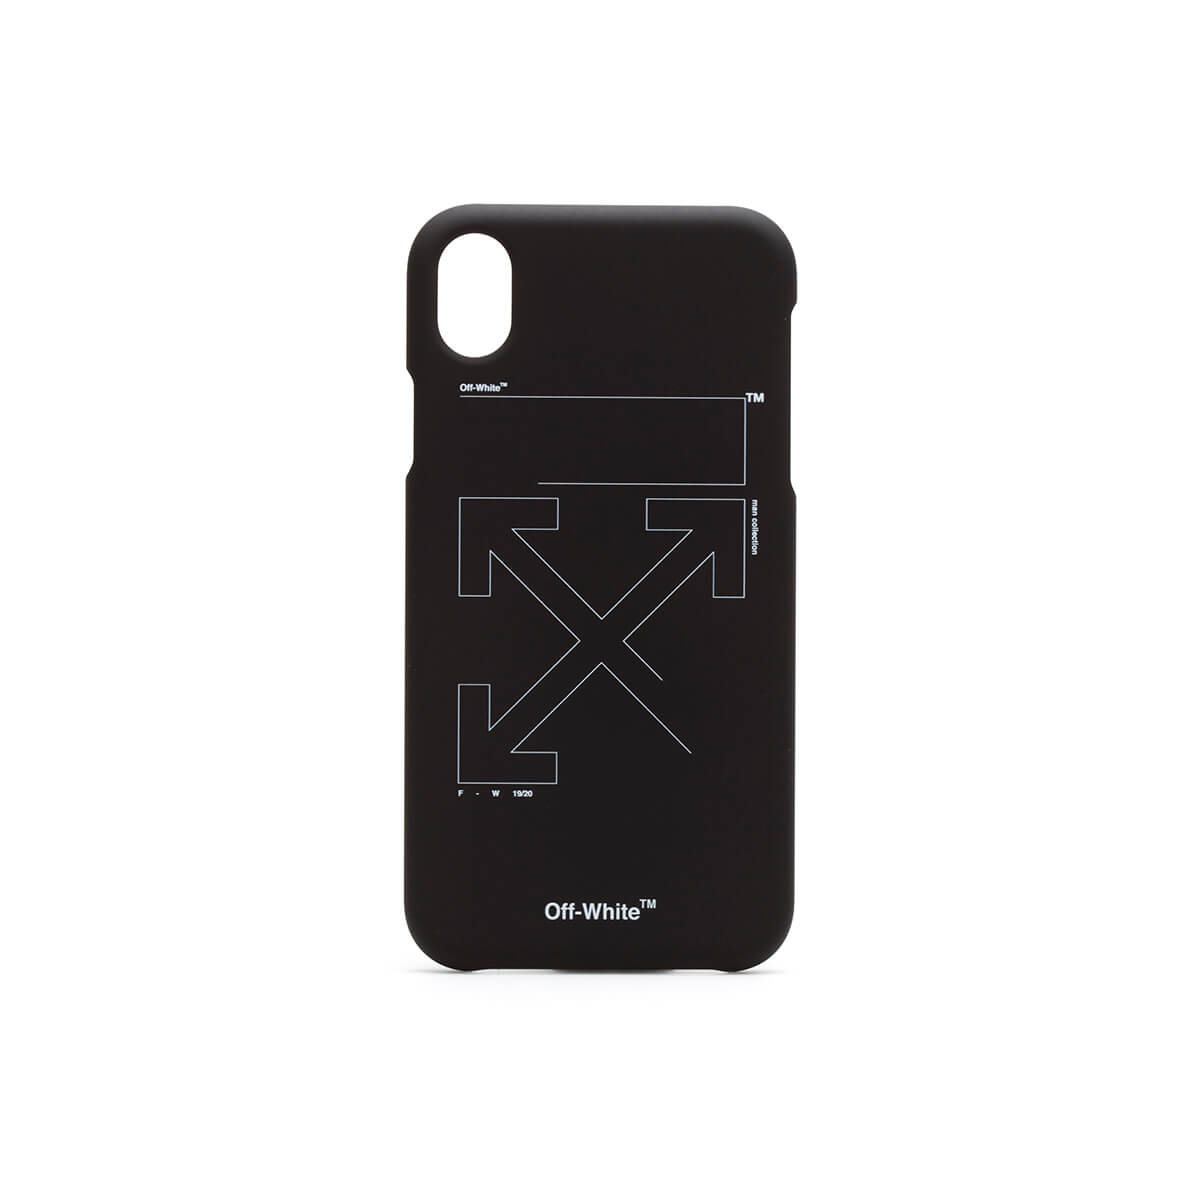 Off-White Off-White Iphone Xr Unfinished Case - Black - 10997274 | italist